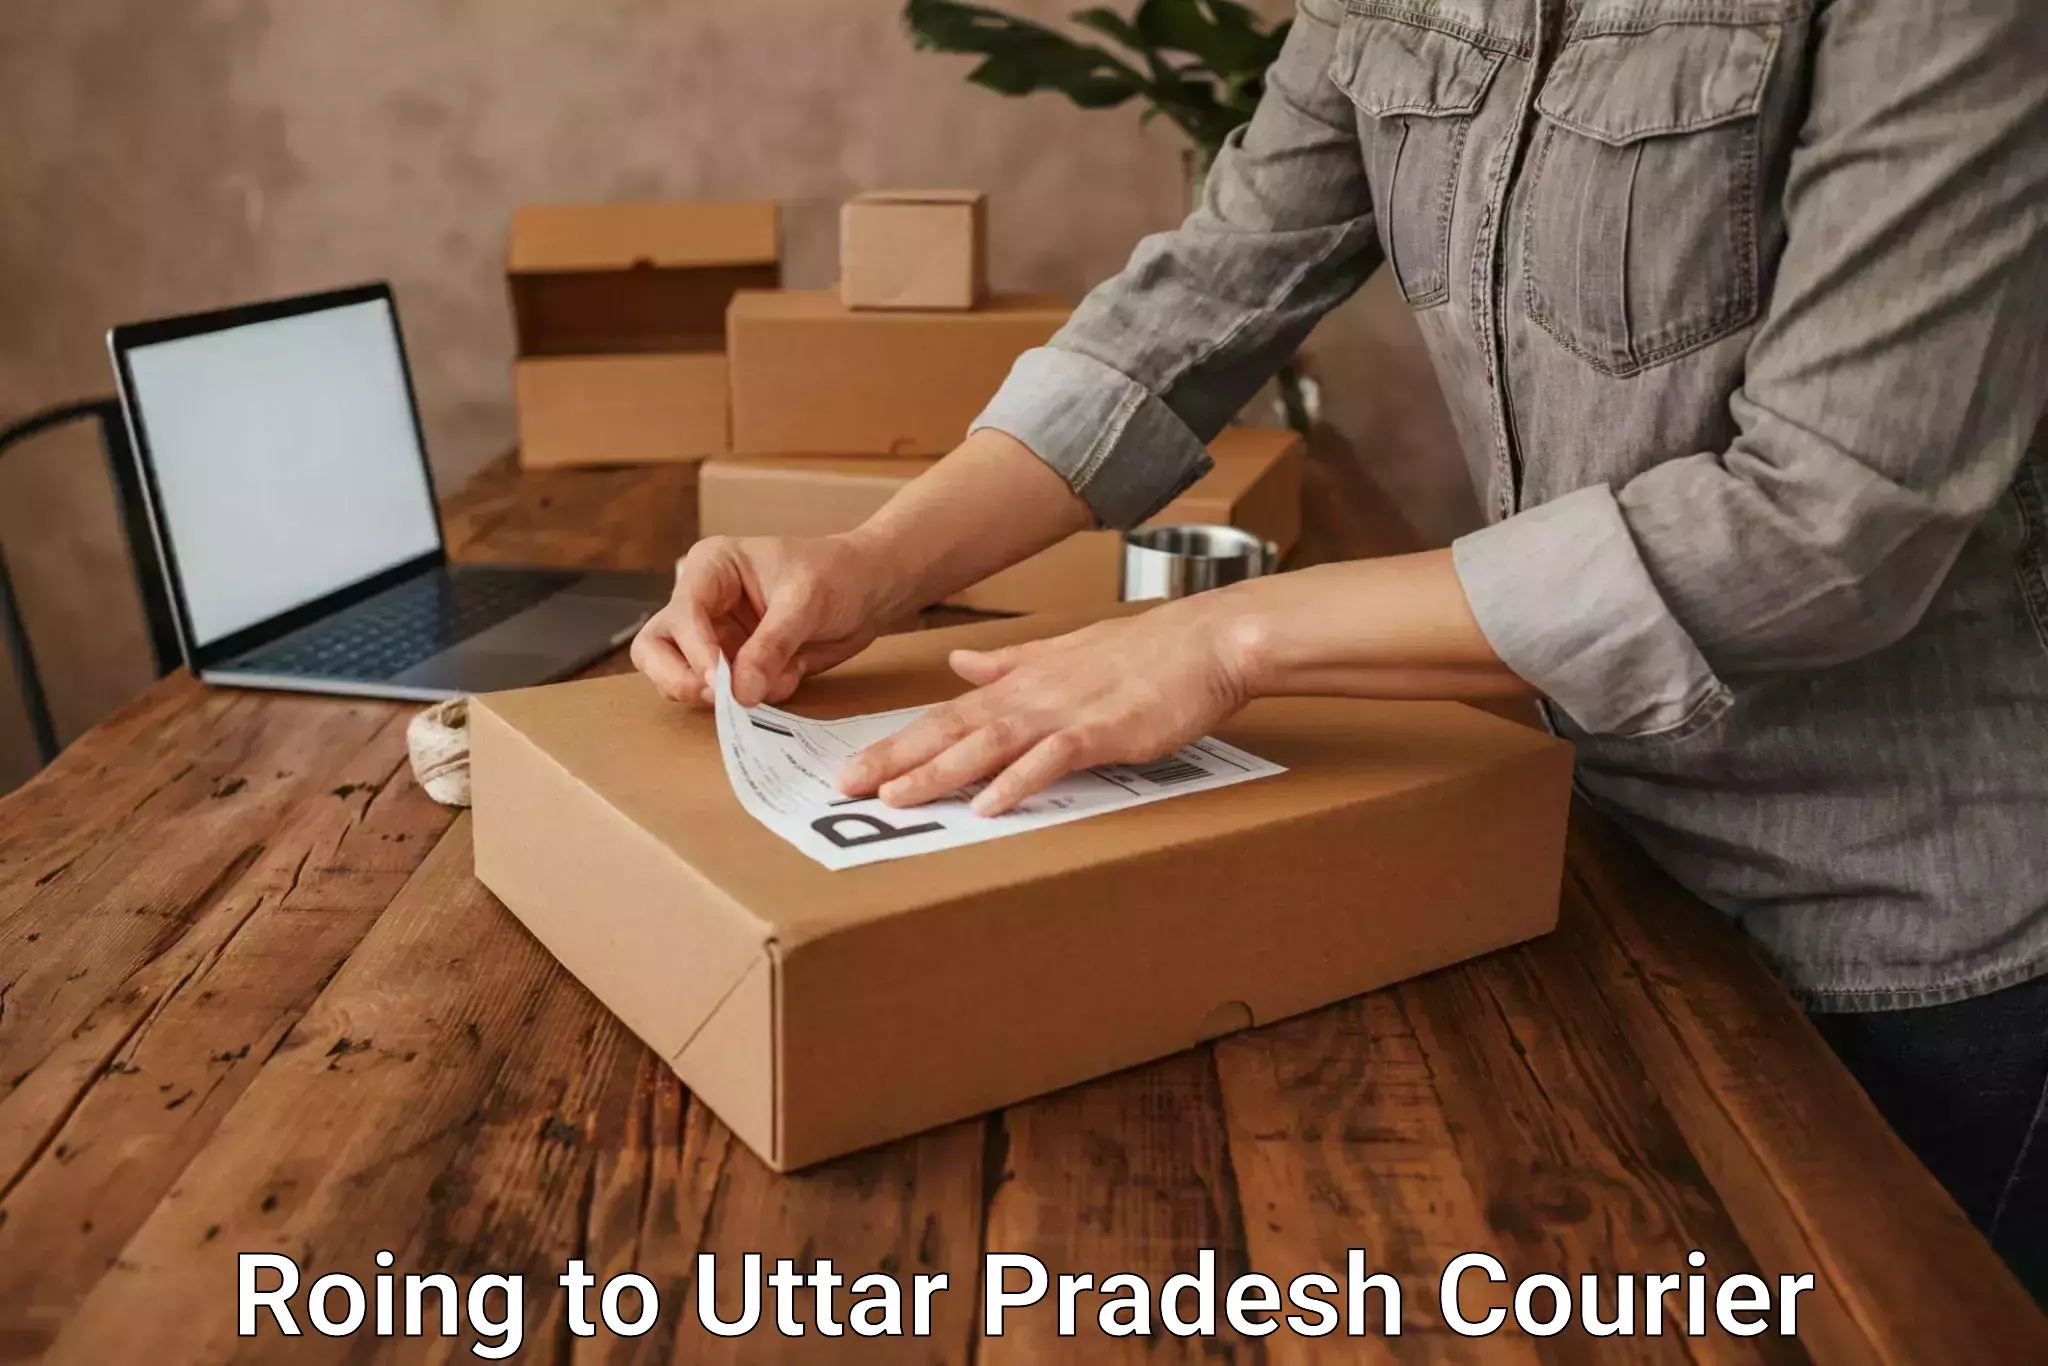 User-friendly delivery service Roing to Uttar Pradesh